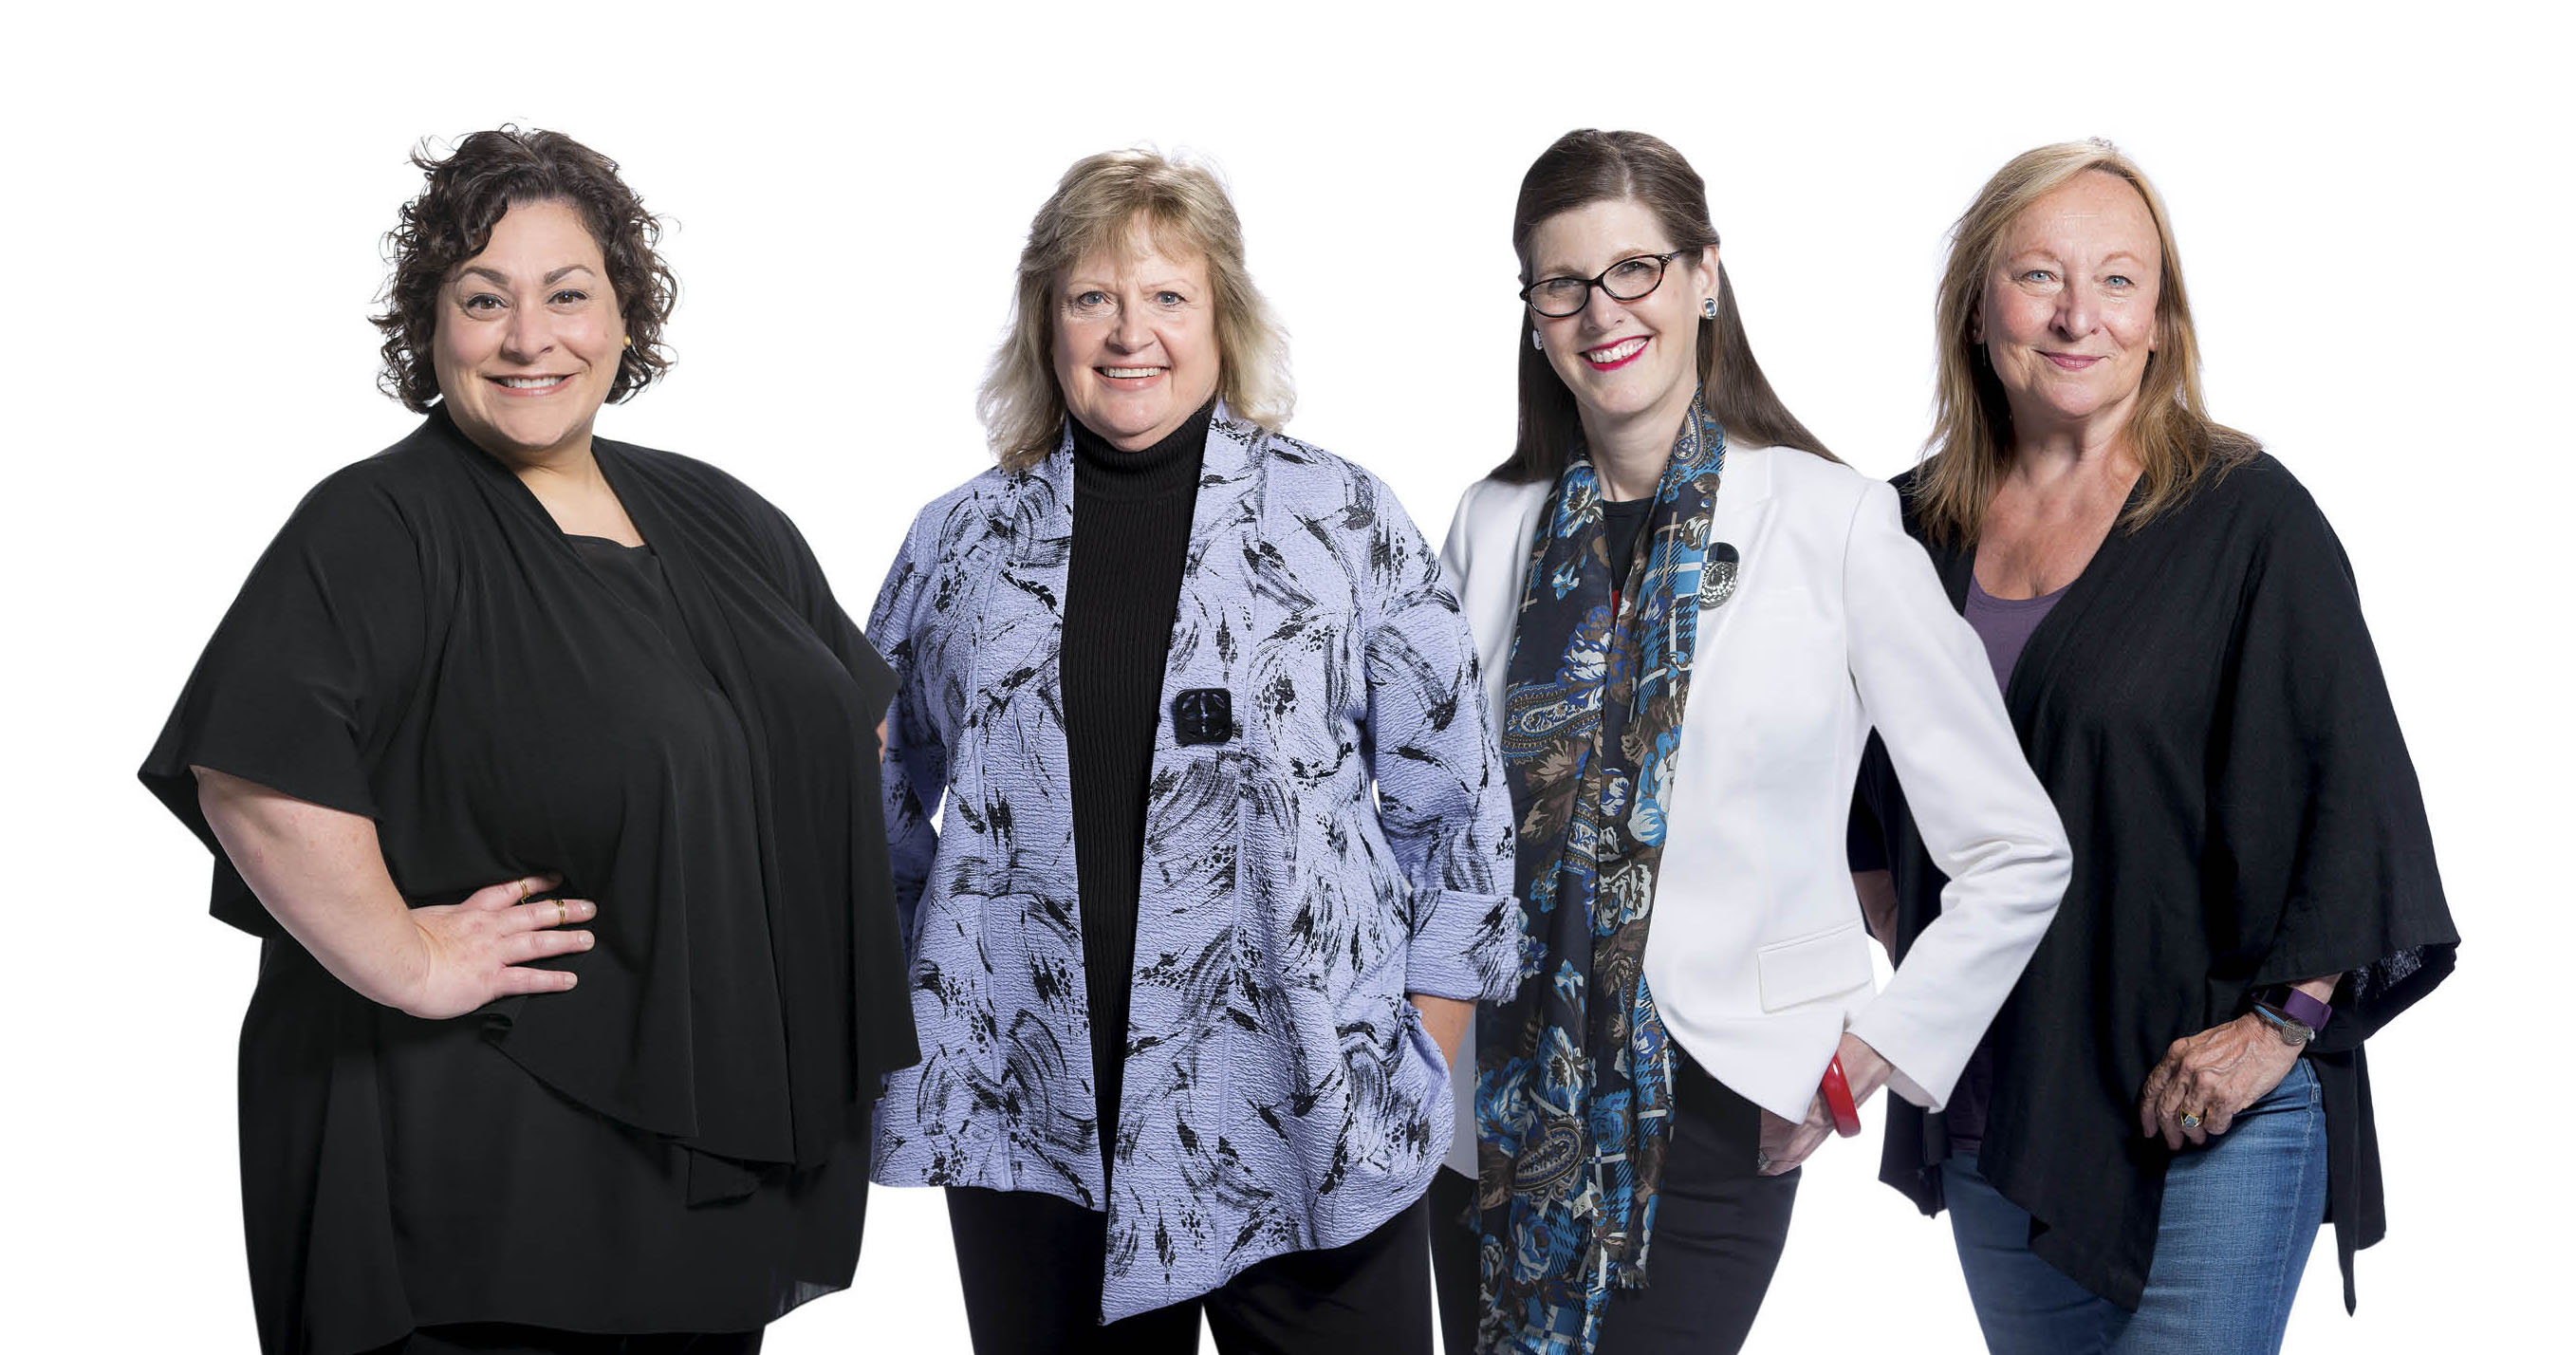 Left to right: Lisa Melandri, Ledy VanKavage, Deb Godwin, Terrie Robbins (Photography by Kevin A. Roberts)